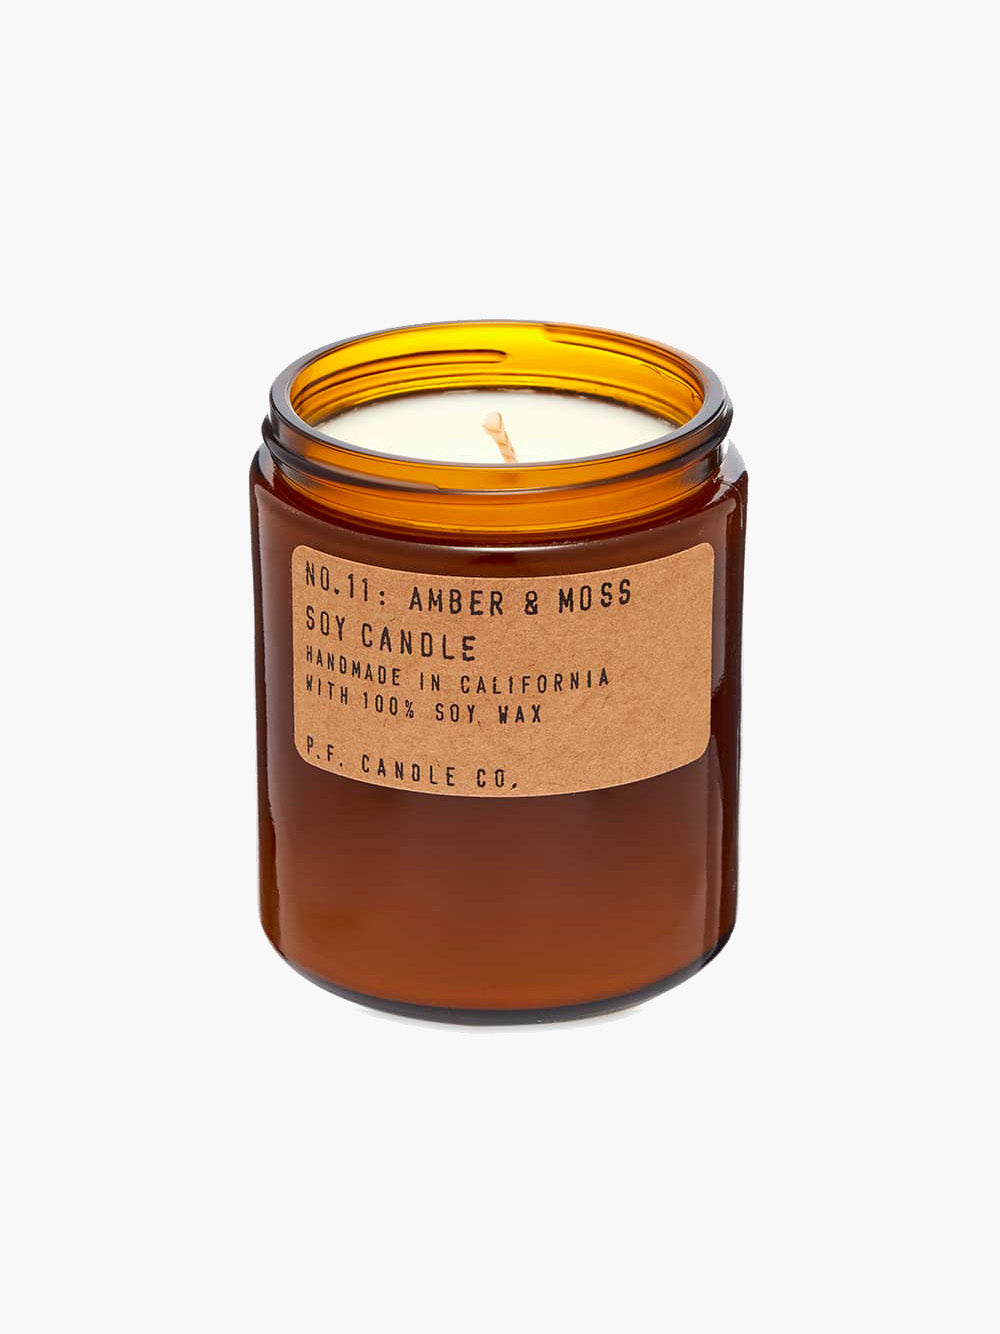 P.F. Candle Co. 204g Soy Candle - No.11 Amber & Moss